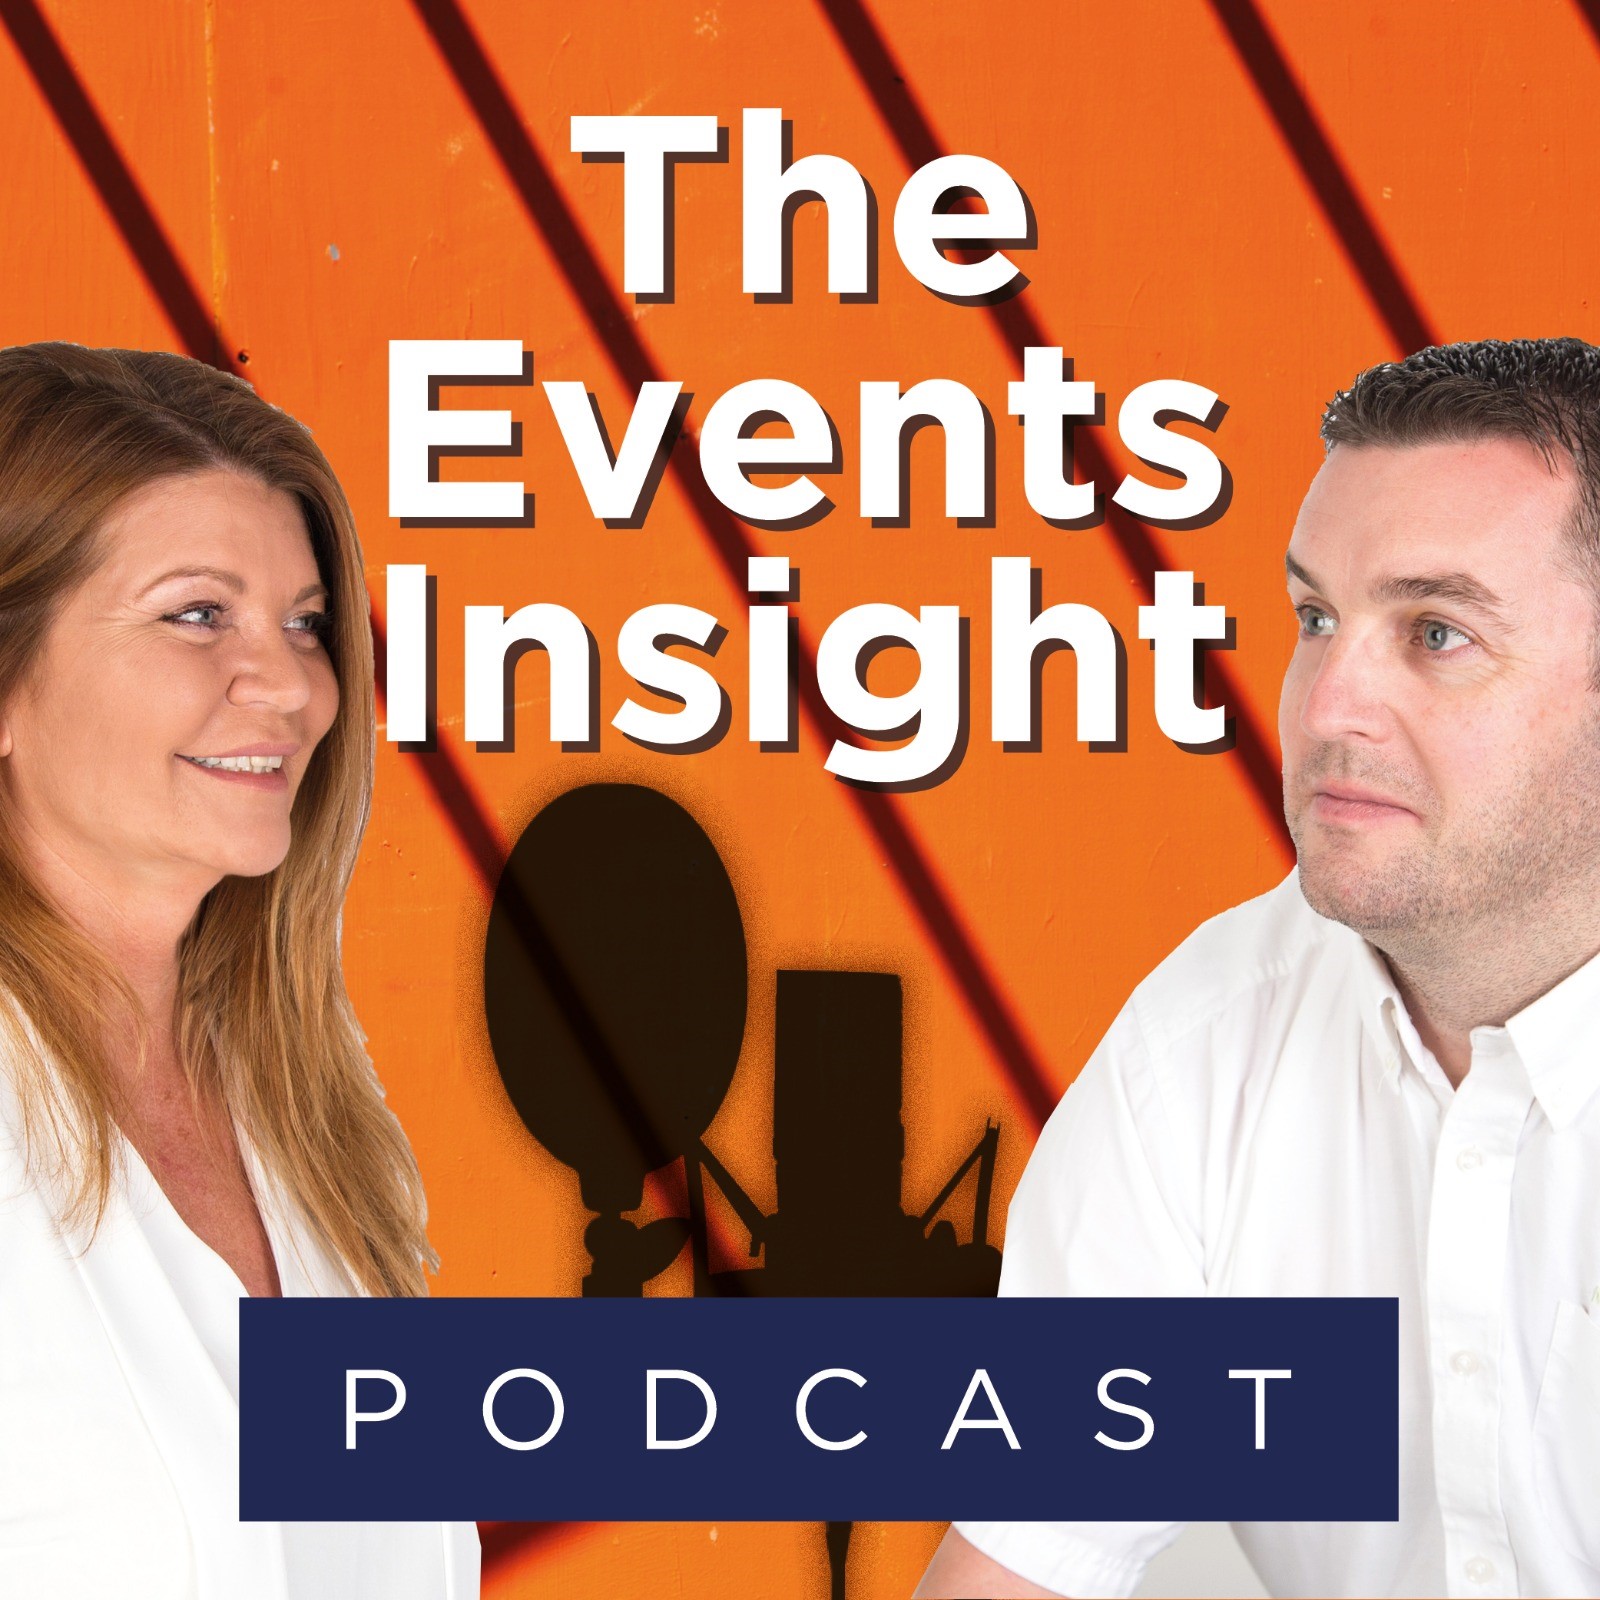 The Events Insight podcast